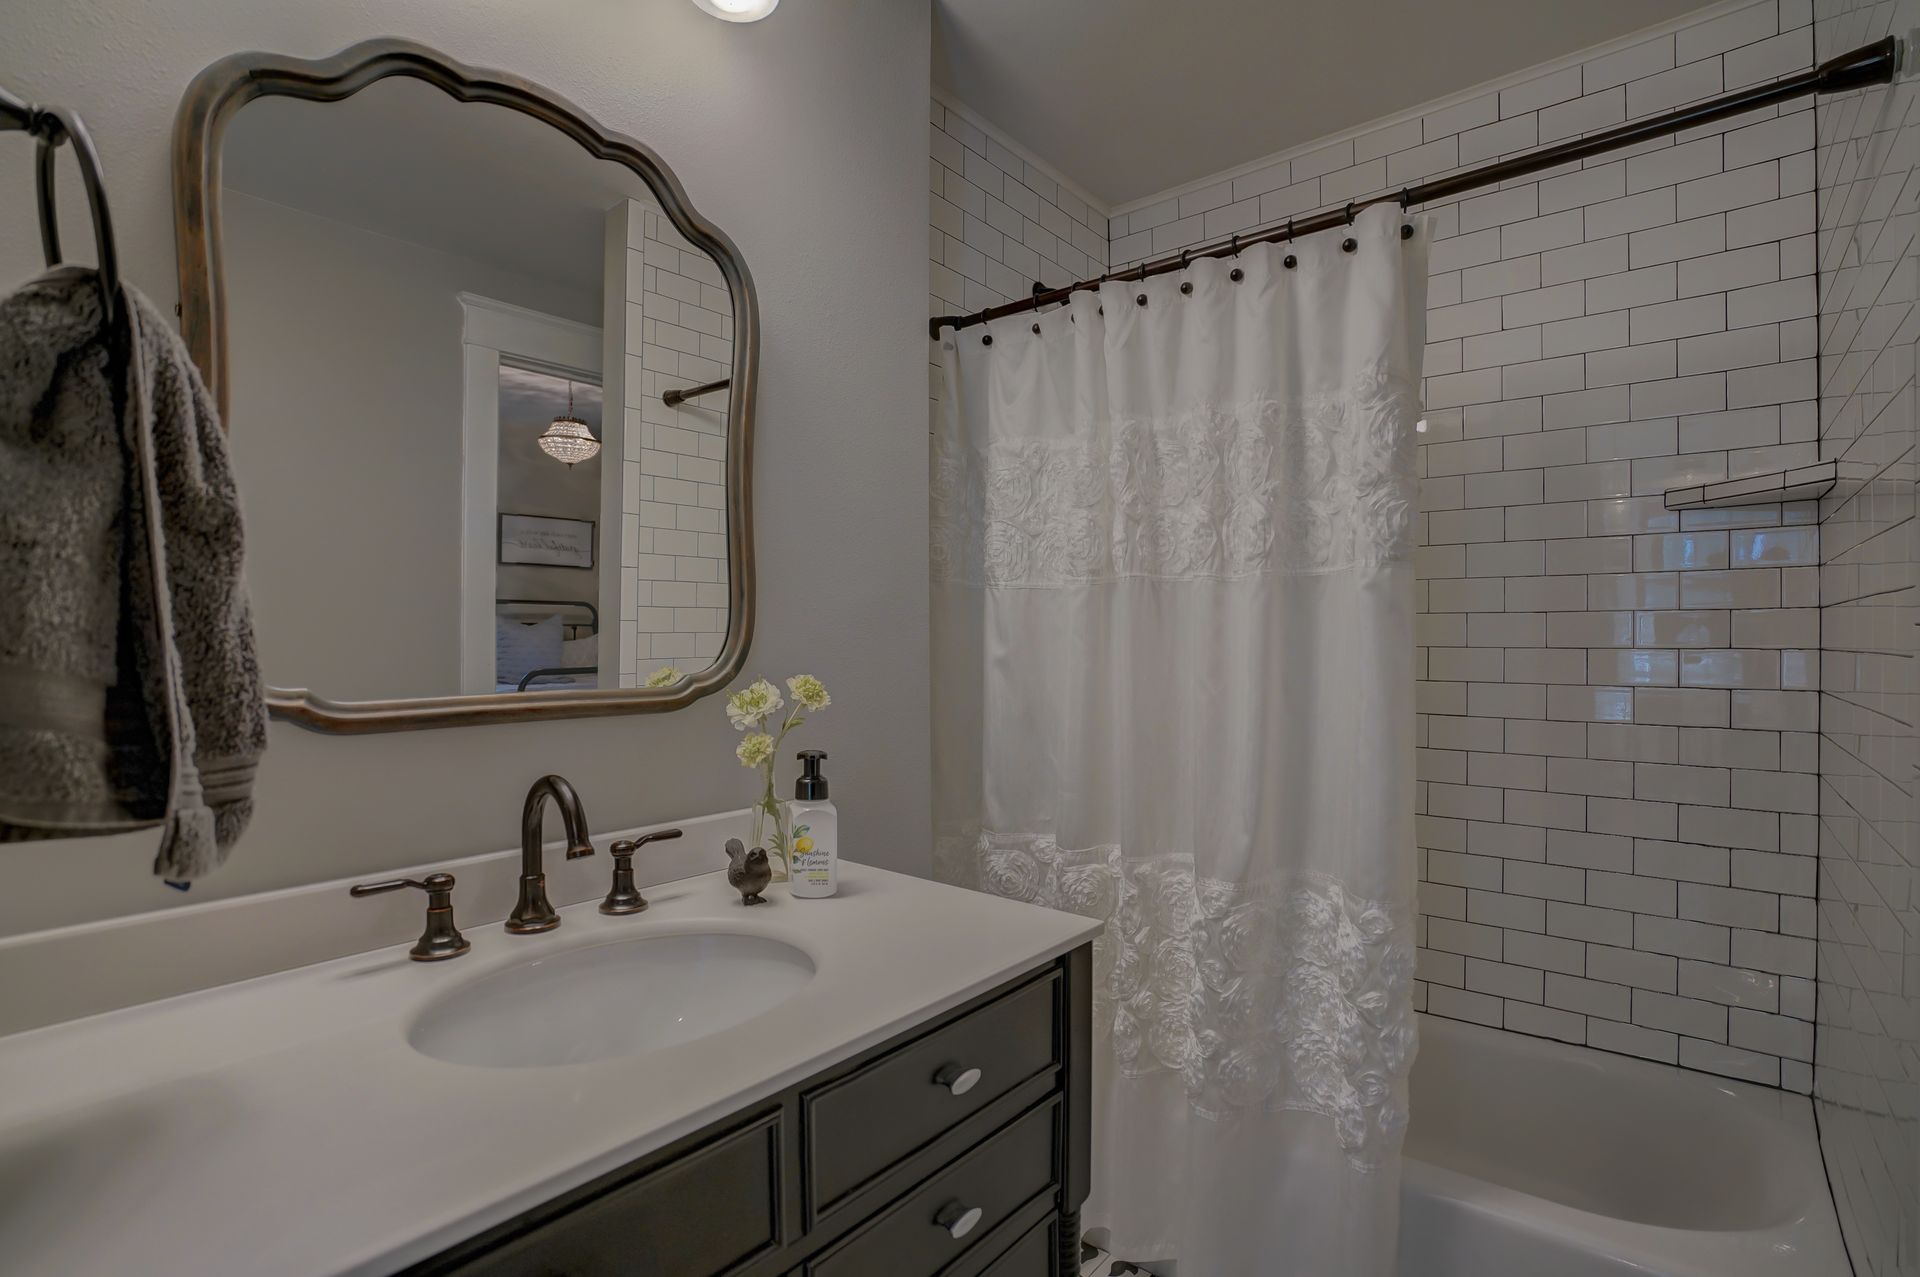 A bathroom with a sink , mirror and shower curtain.